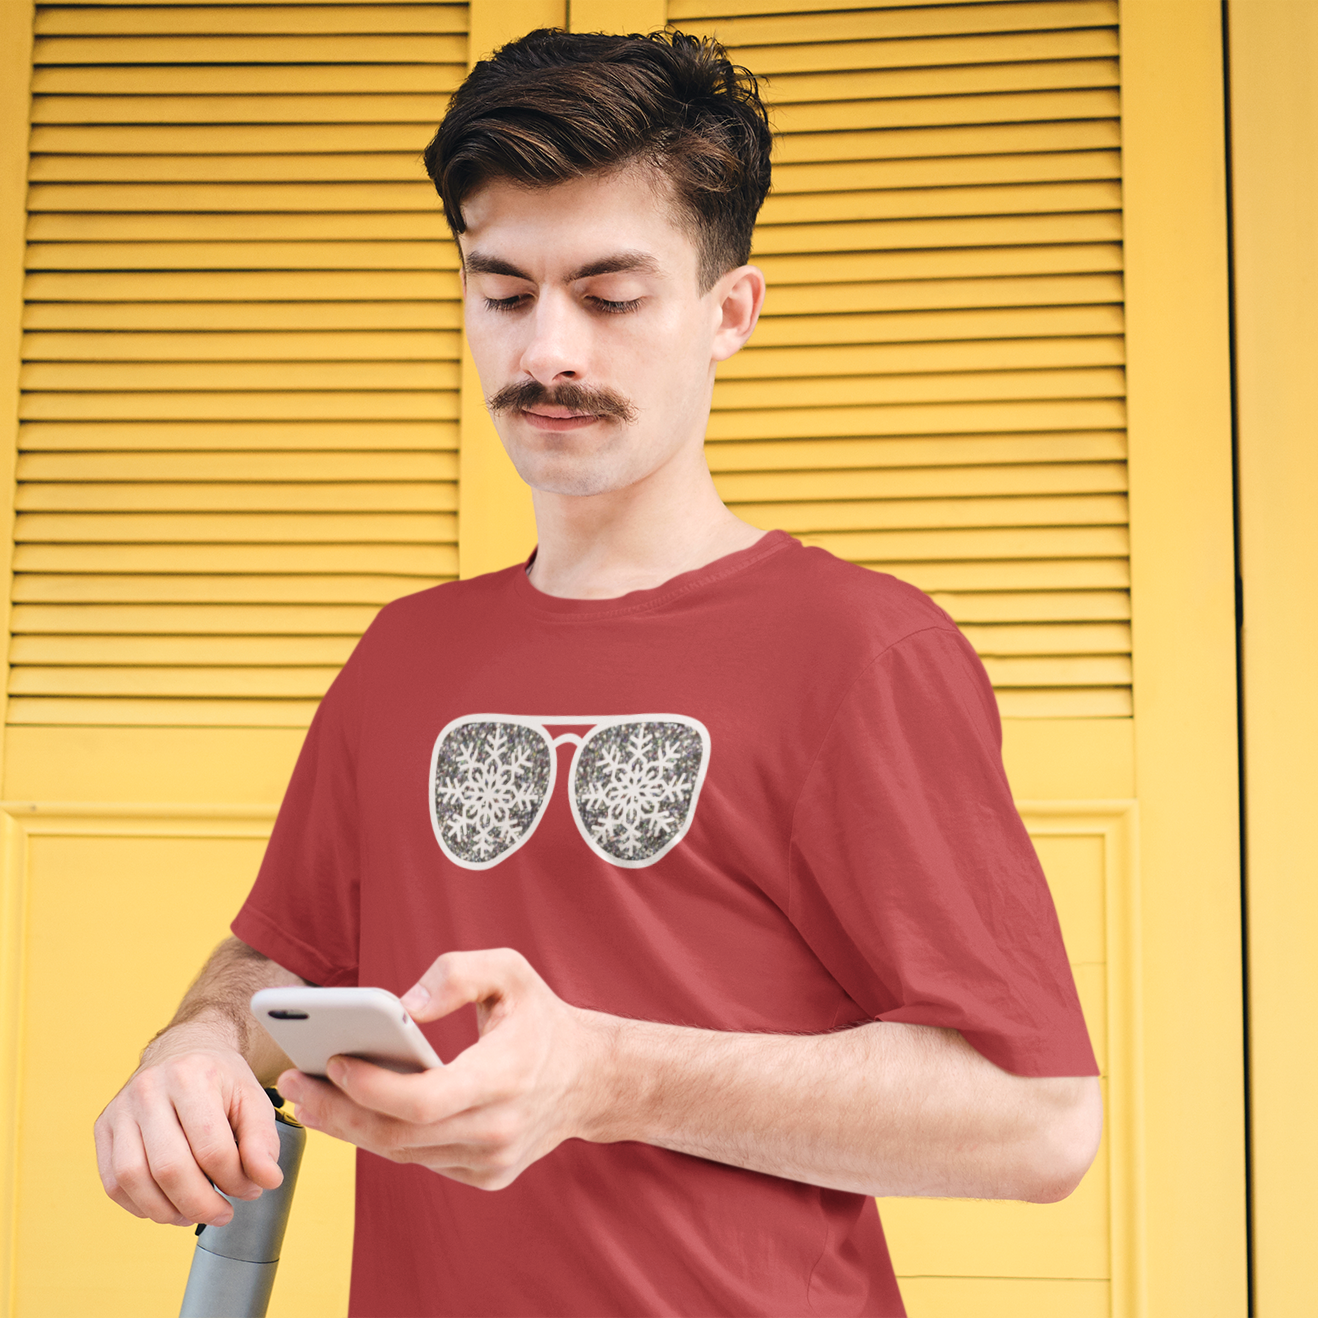 Man with mustache looking at his phone in front of yellow door, wearing red shirt with glitter snow star glasses by KMLeon.